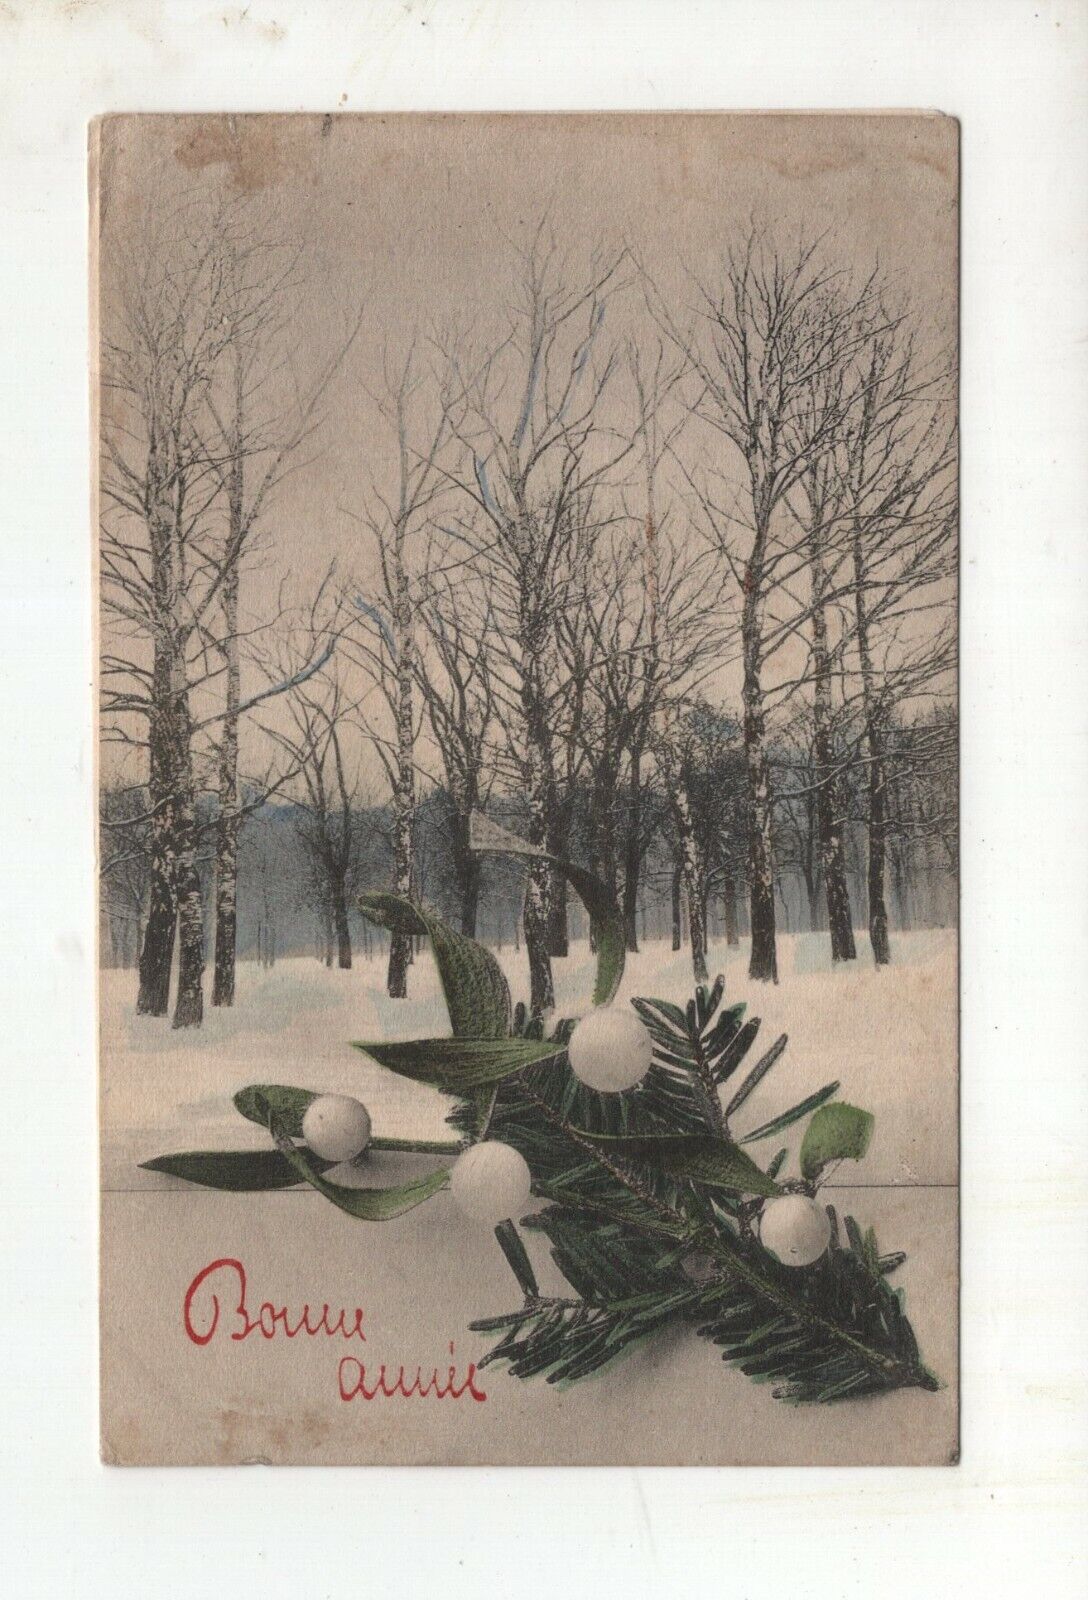 Antique Post Card - Orleans France - Message is in Esperanto - Posted 1908